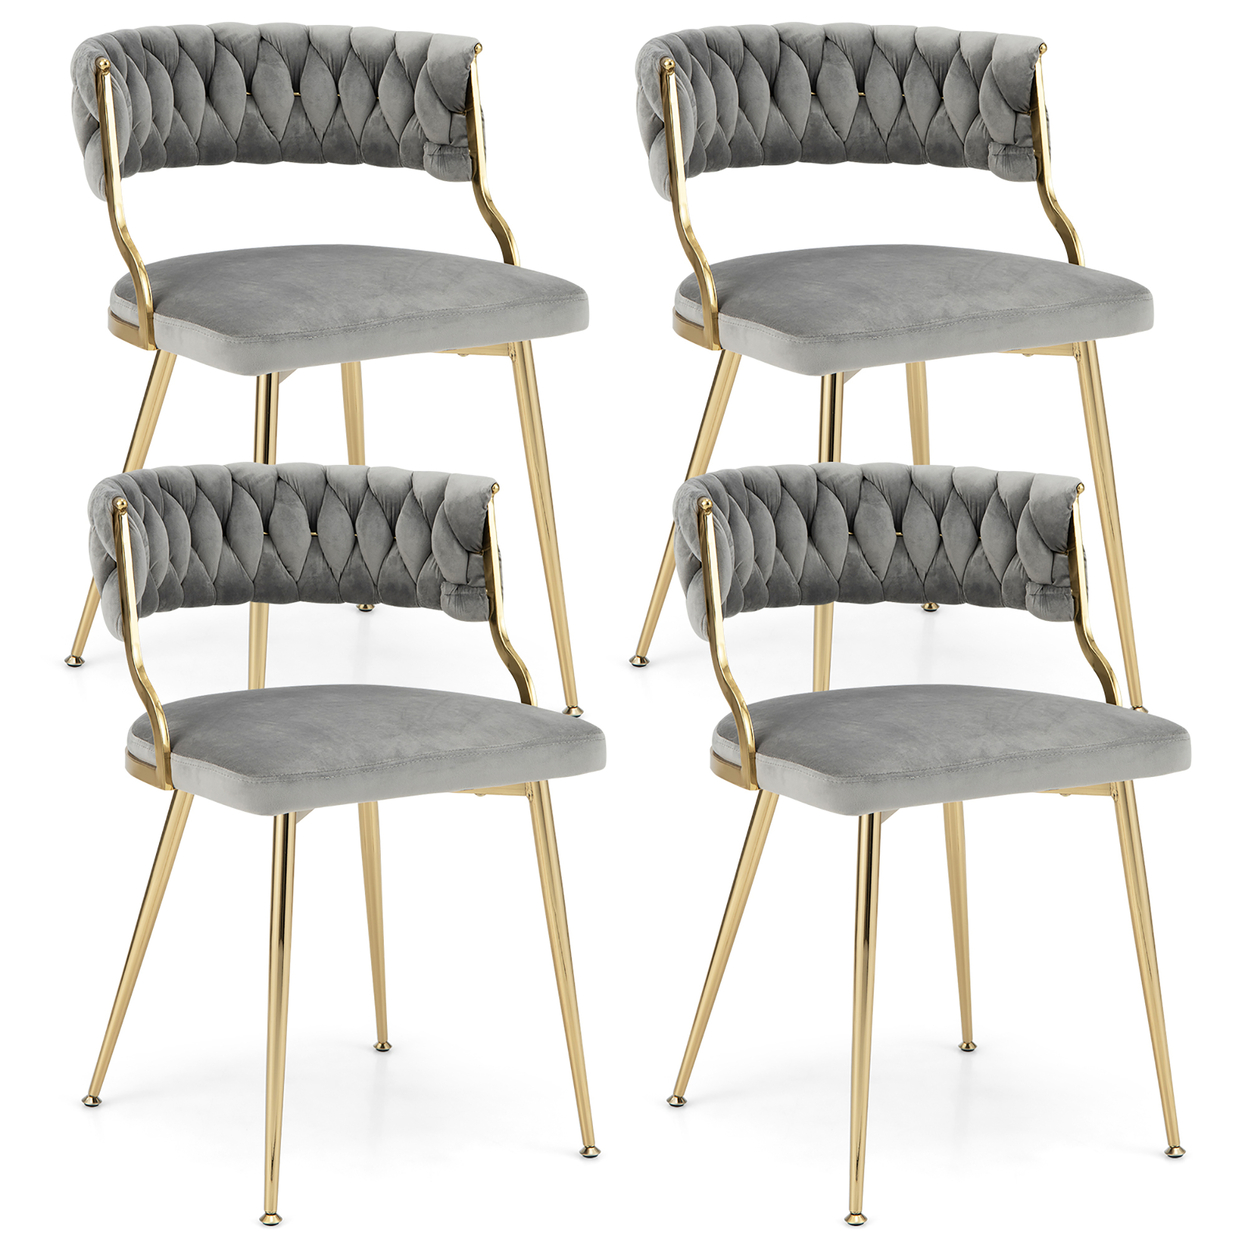 Velvet Dining Chairs Set Of 4 Accent Upholstered Leisure Chairs W/ Gold Metal Legs